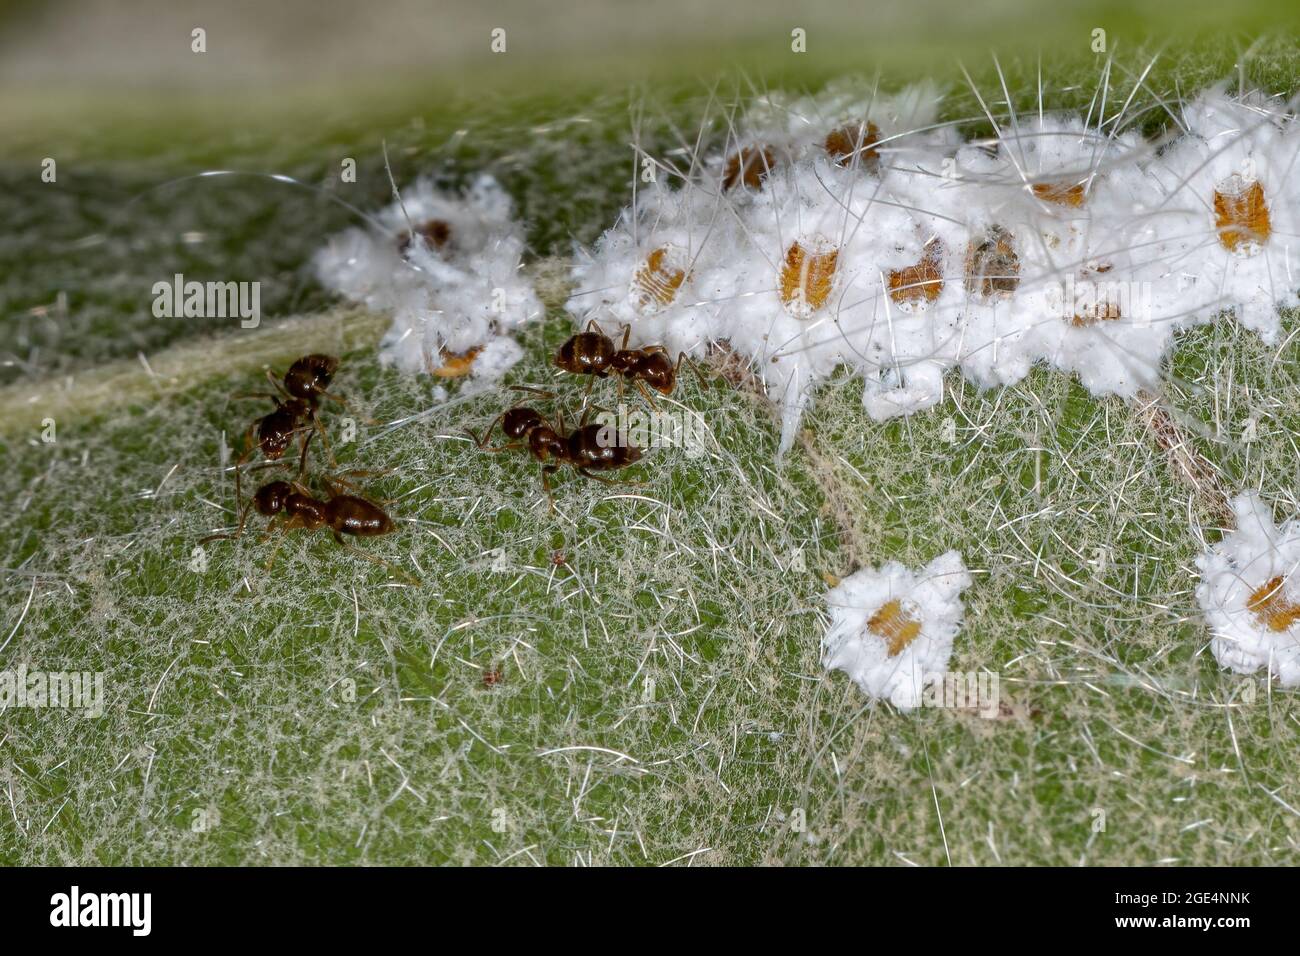 Small Whiteflies Insects of the Family Aleyrodidae with Adults Rover Ants of the Genus Brachymyrmex in a look of the Oiti tree of the species Licania Stock Photo